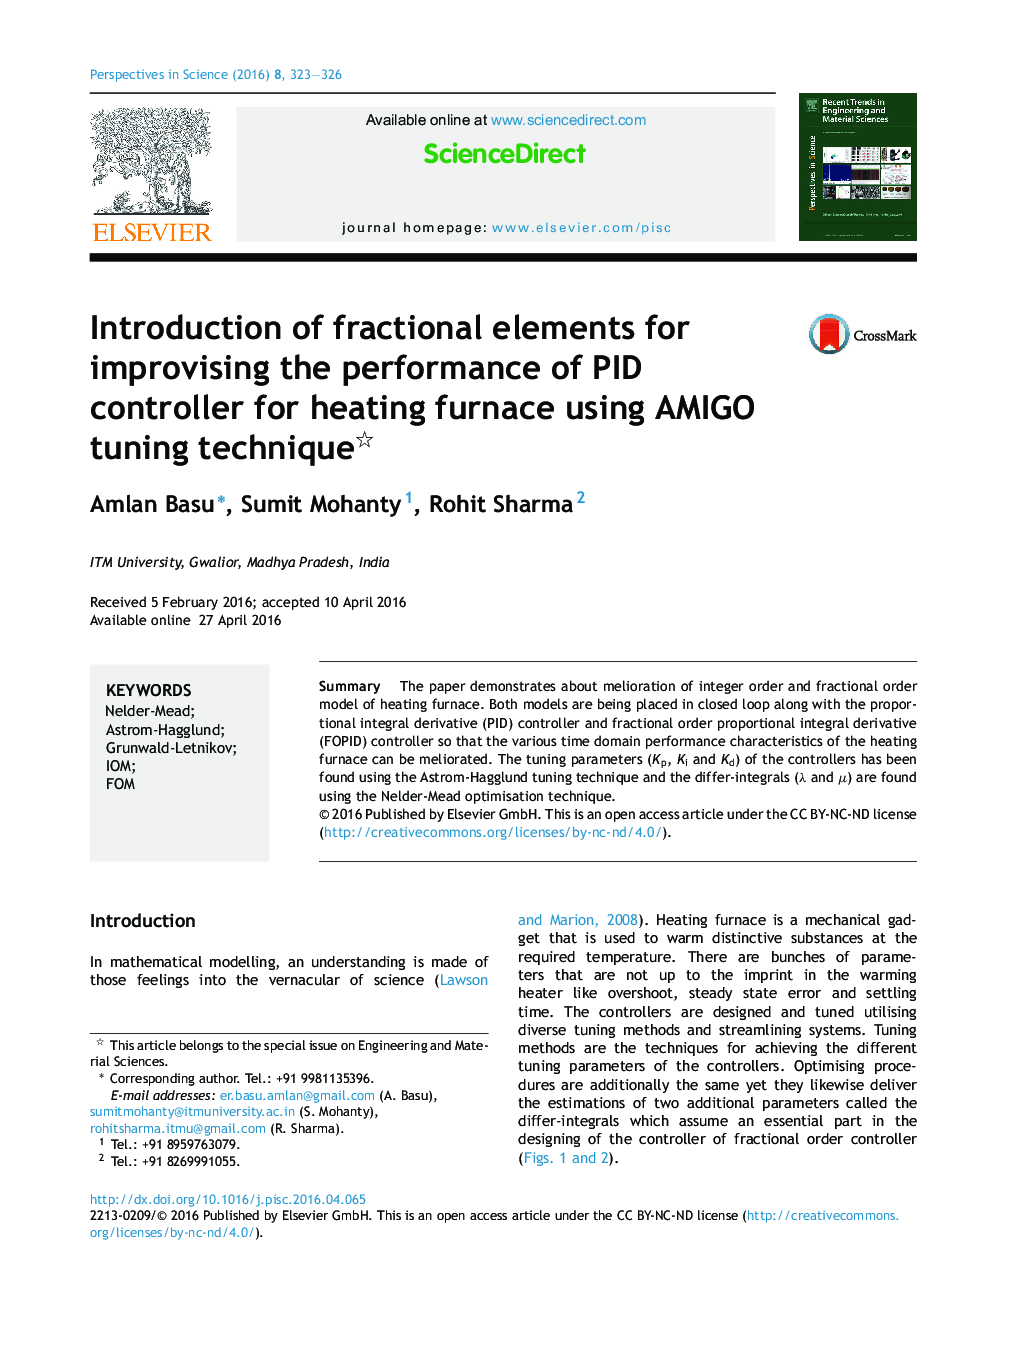 Introduction of fractional elements for improvising the performance of PID controller for heating furnace using AMIGO tuning technique